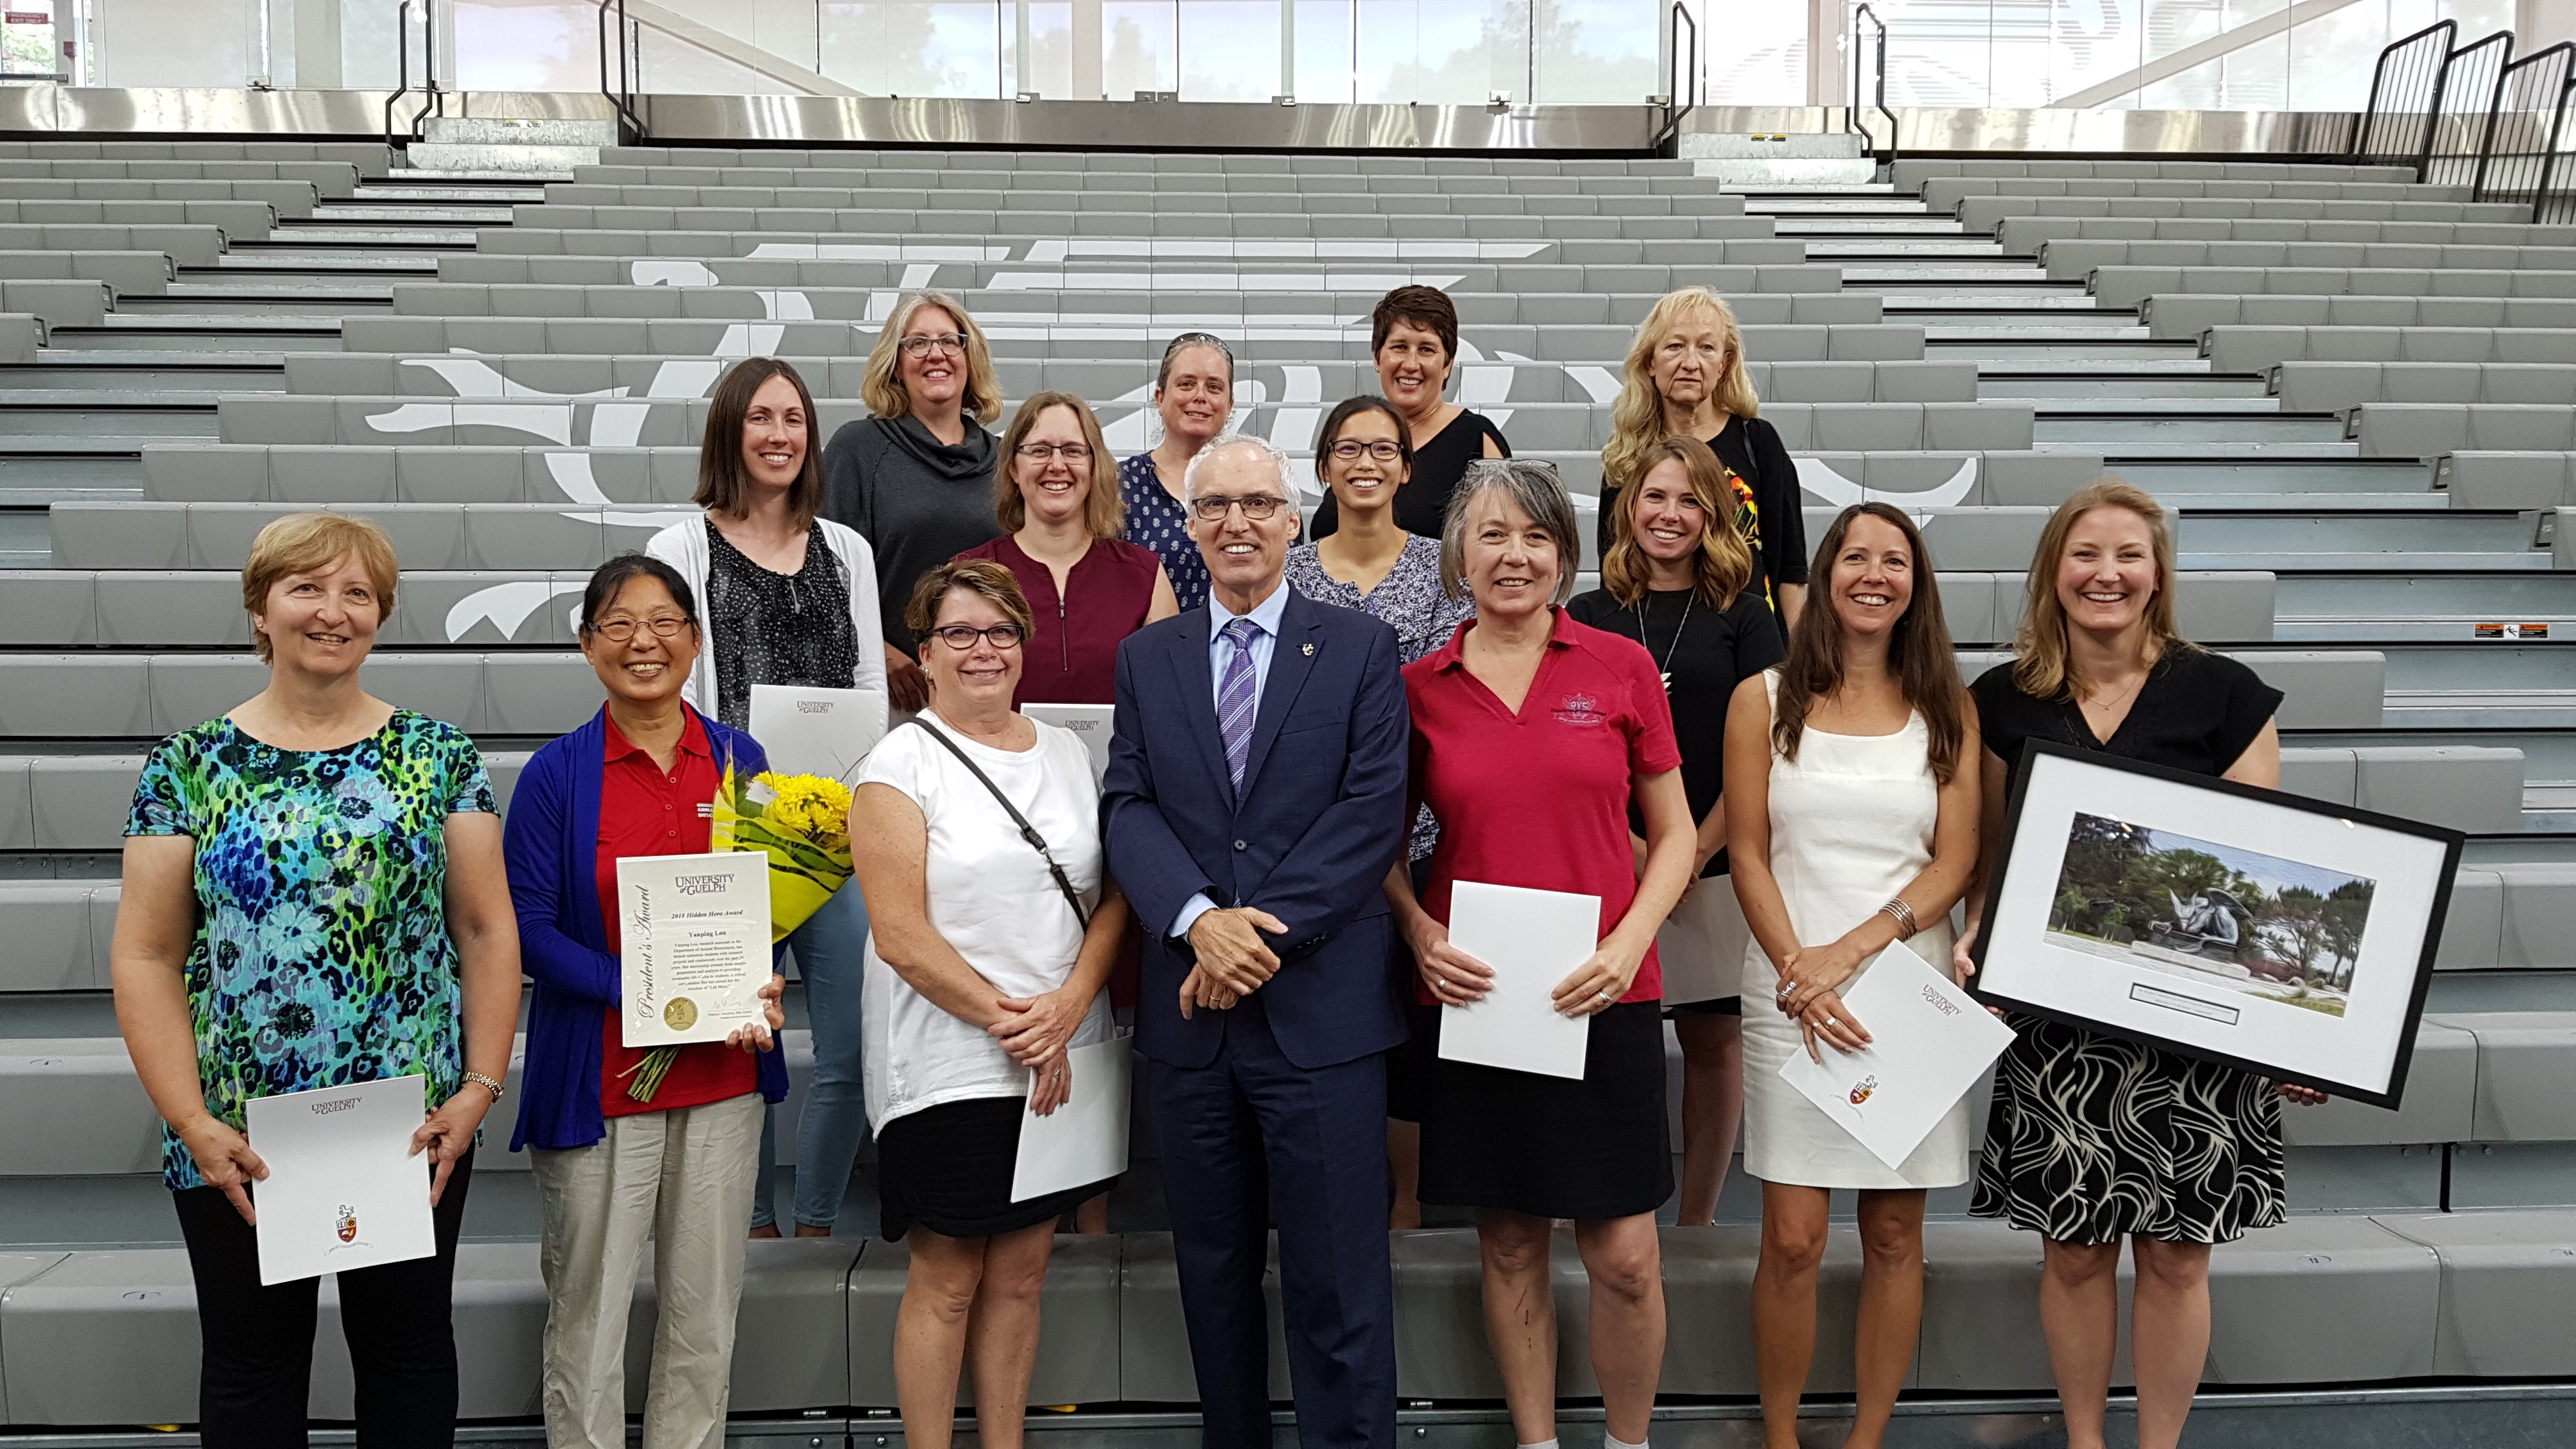 Winners of the 2018 Exemplary Staff Awards with President Vaccarino